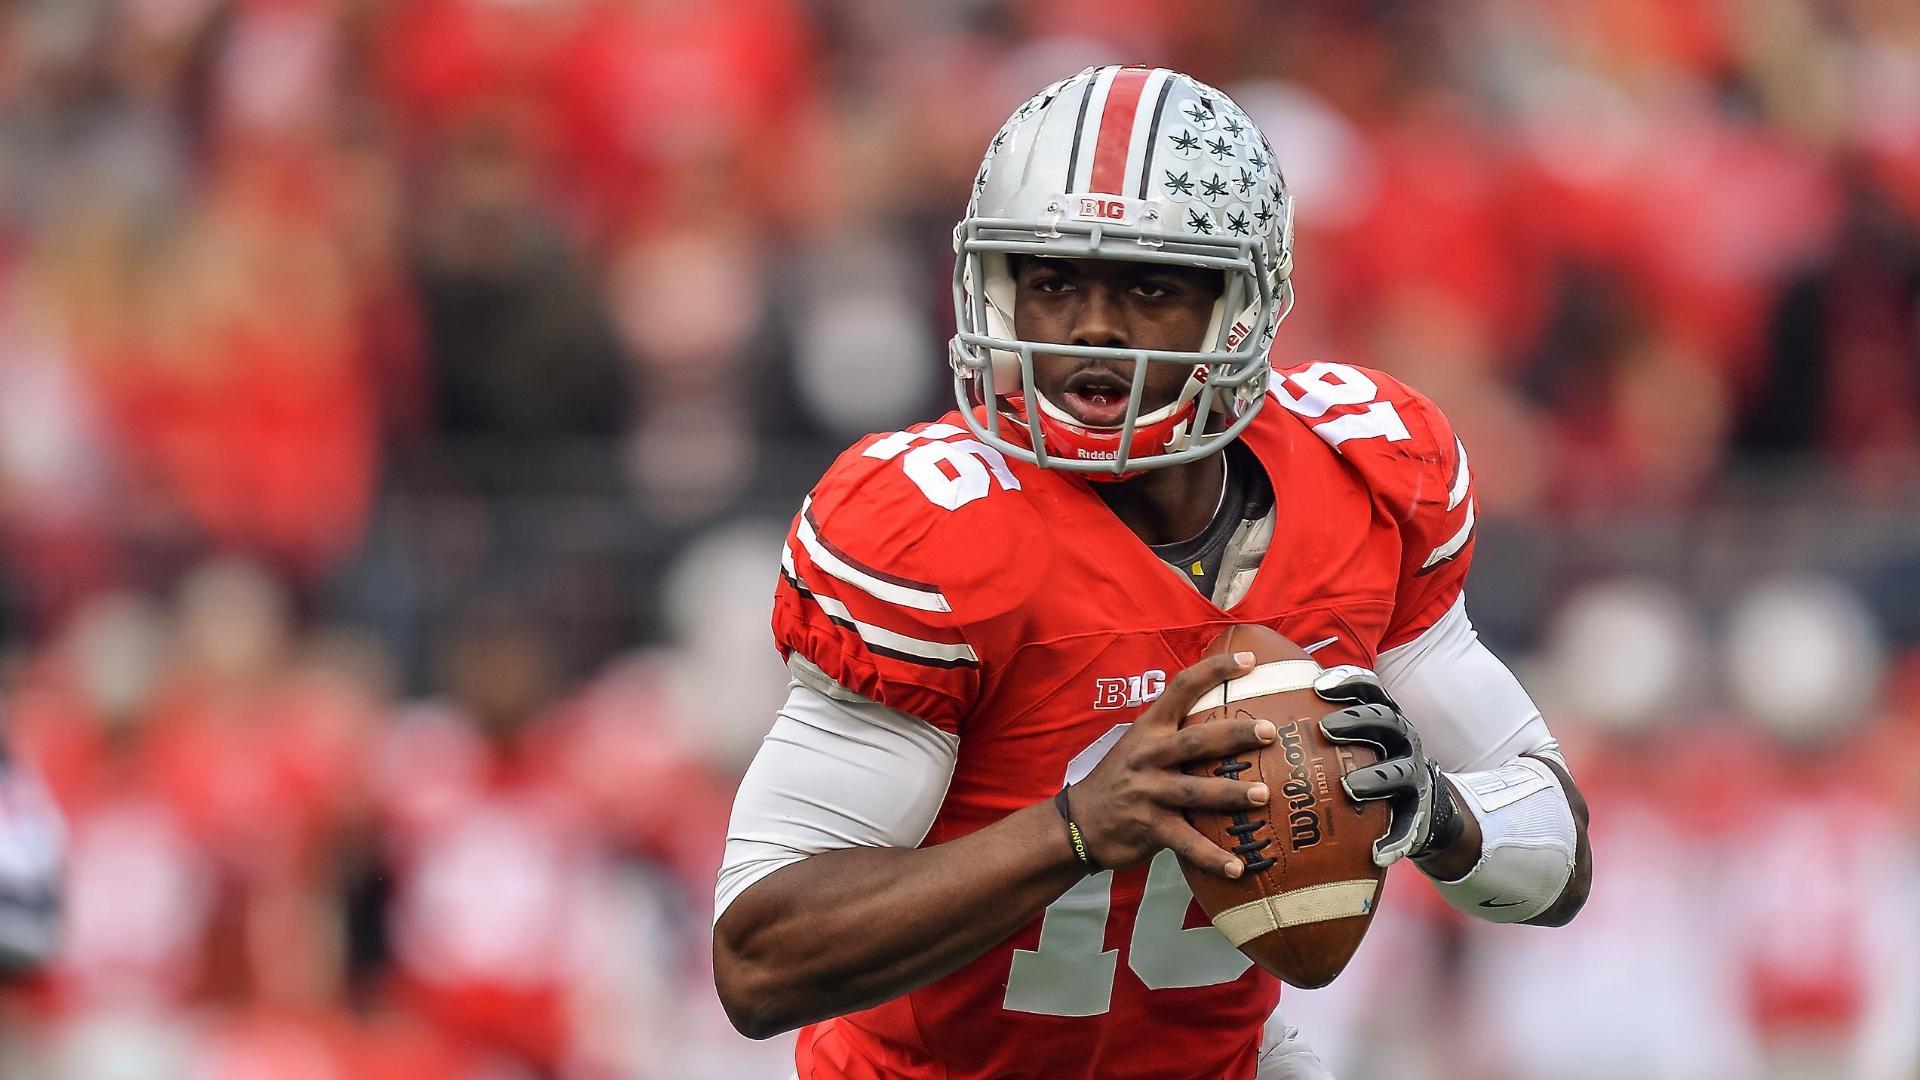 J.T. Barrett suspended after arrest for operating vehicle while